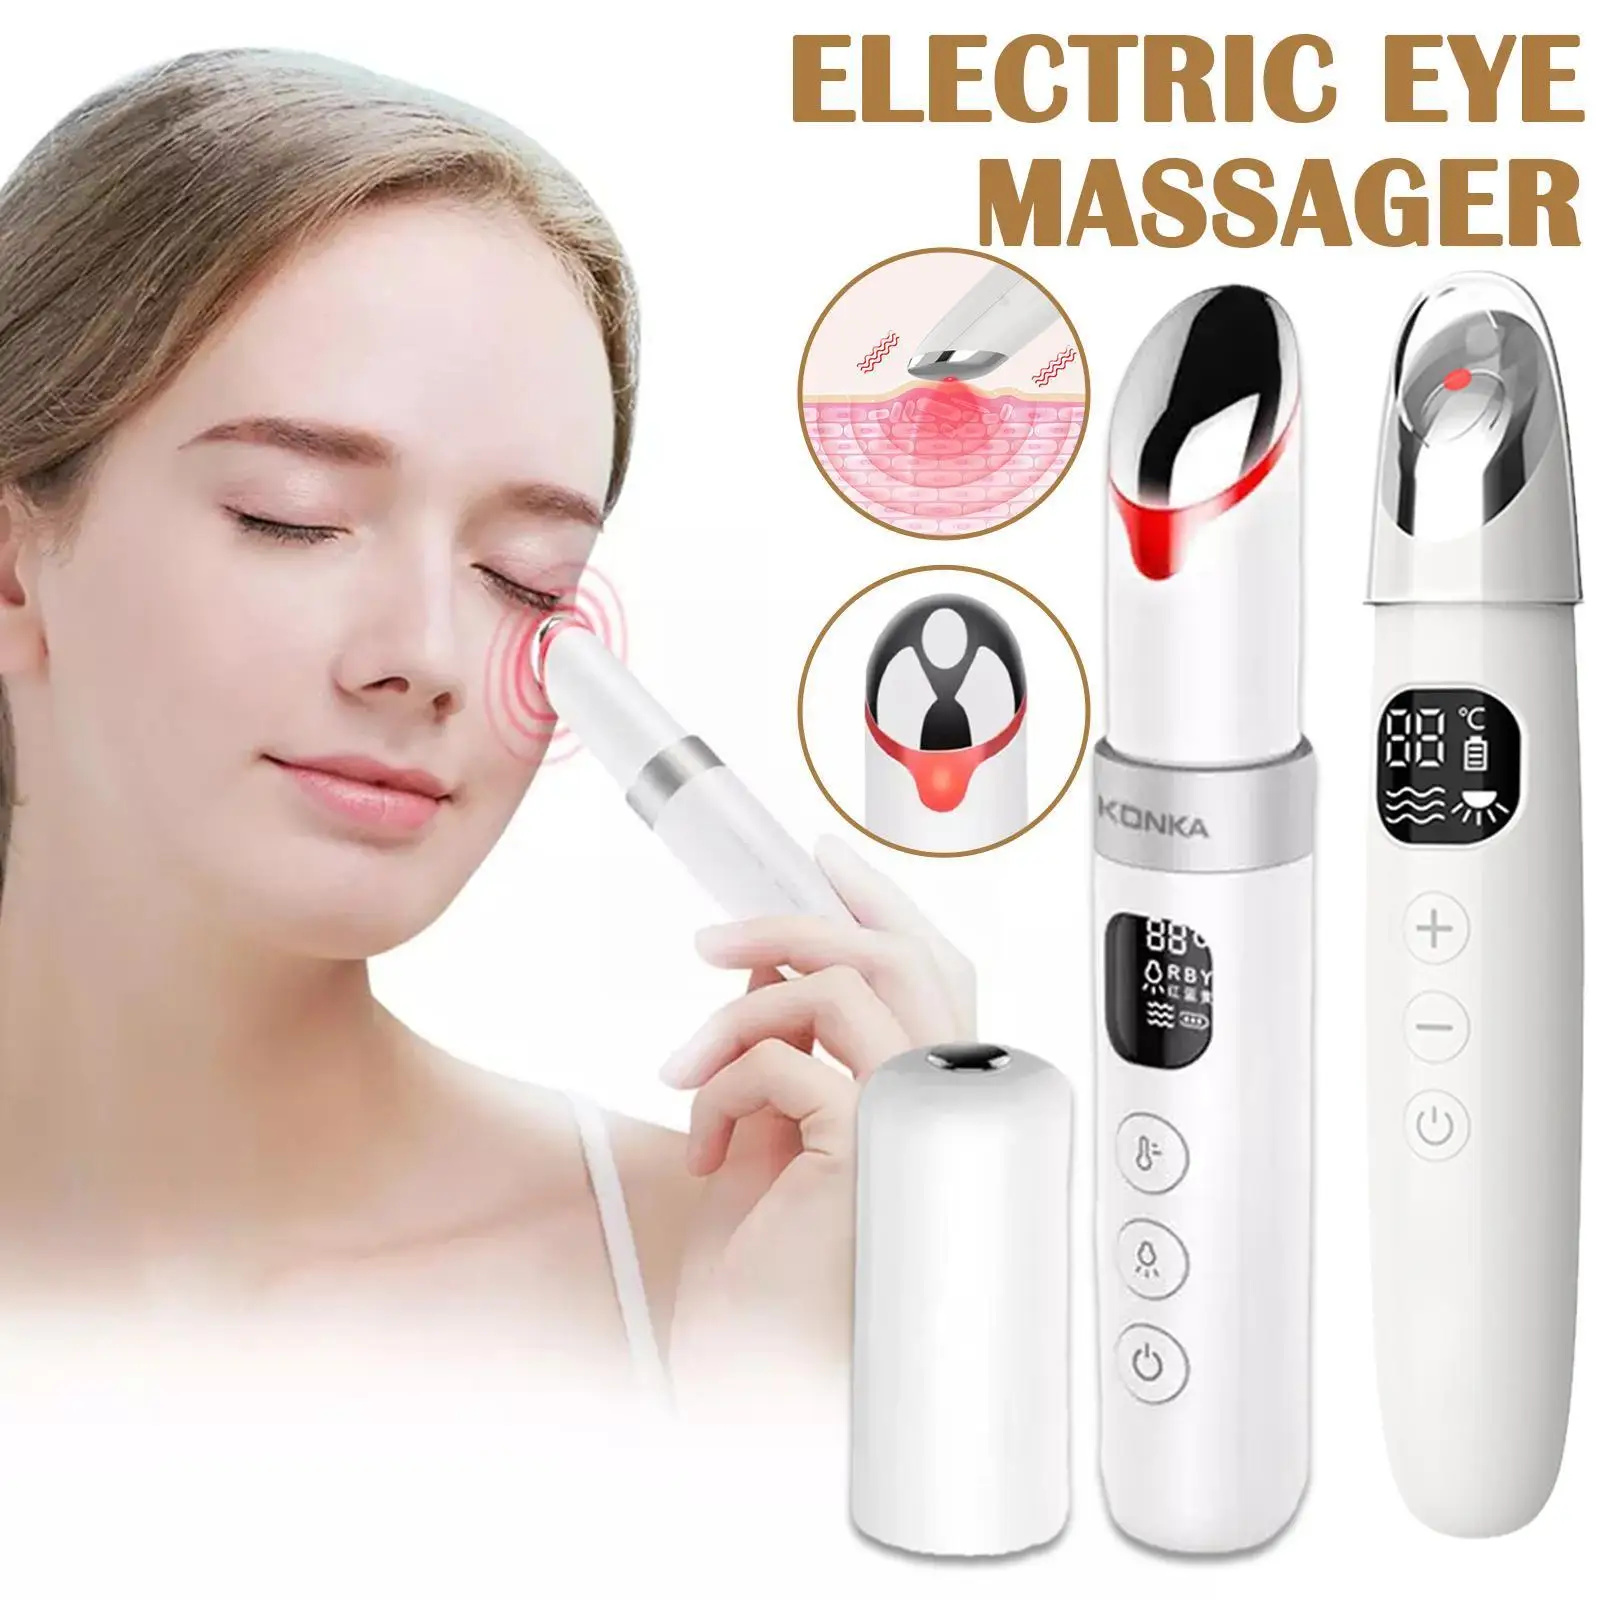 

Electric Eye Massager Anti-Ageing Wrinkle Massager Vibration Device Circle Dark Massage Pen Facials Portable Electric L7C8